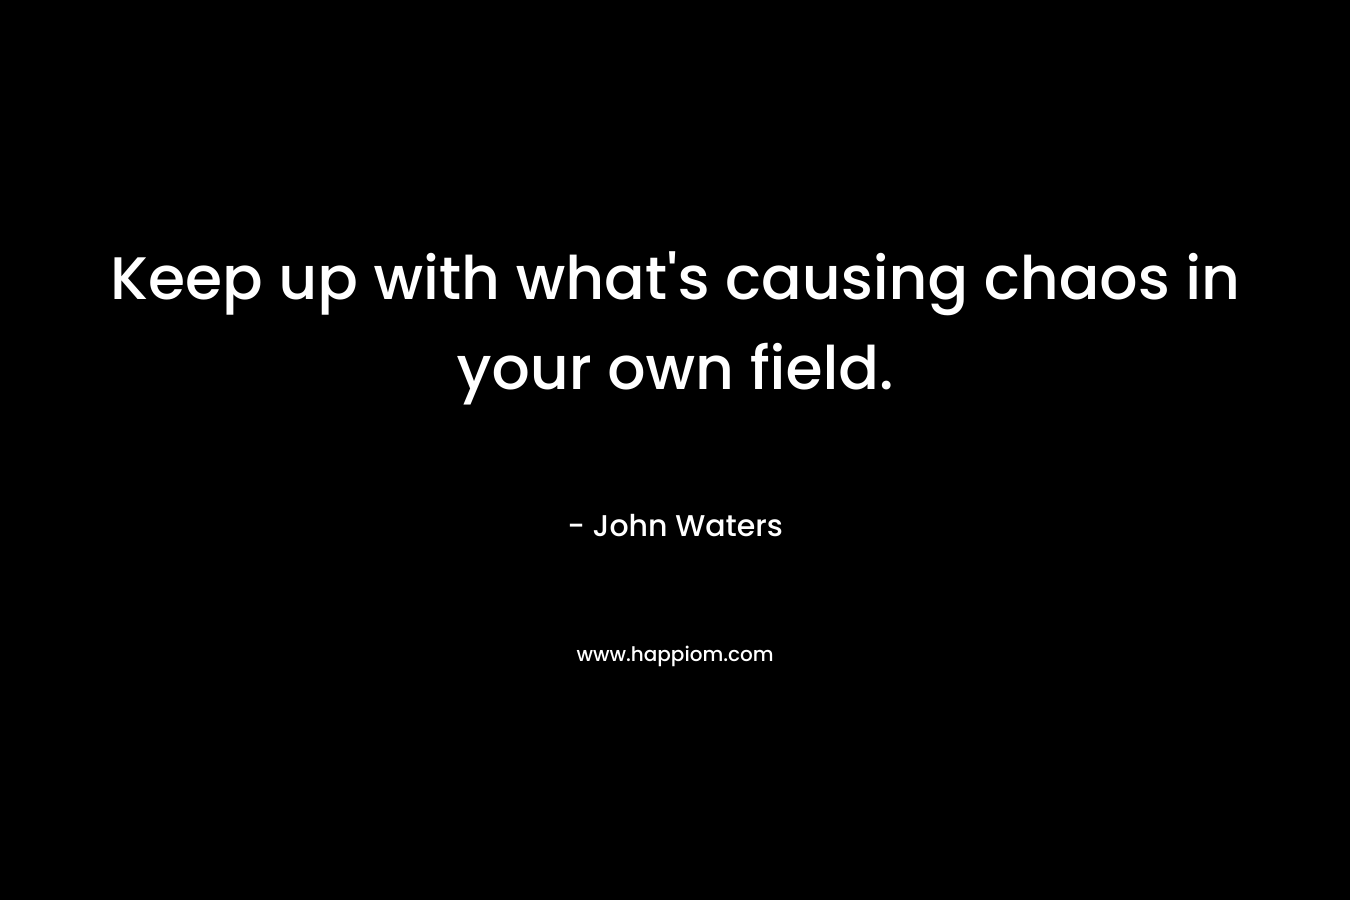 Keep up with what’s causing chaos in your own field. – John Waters